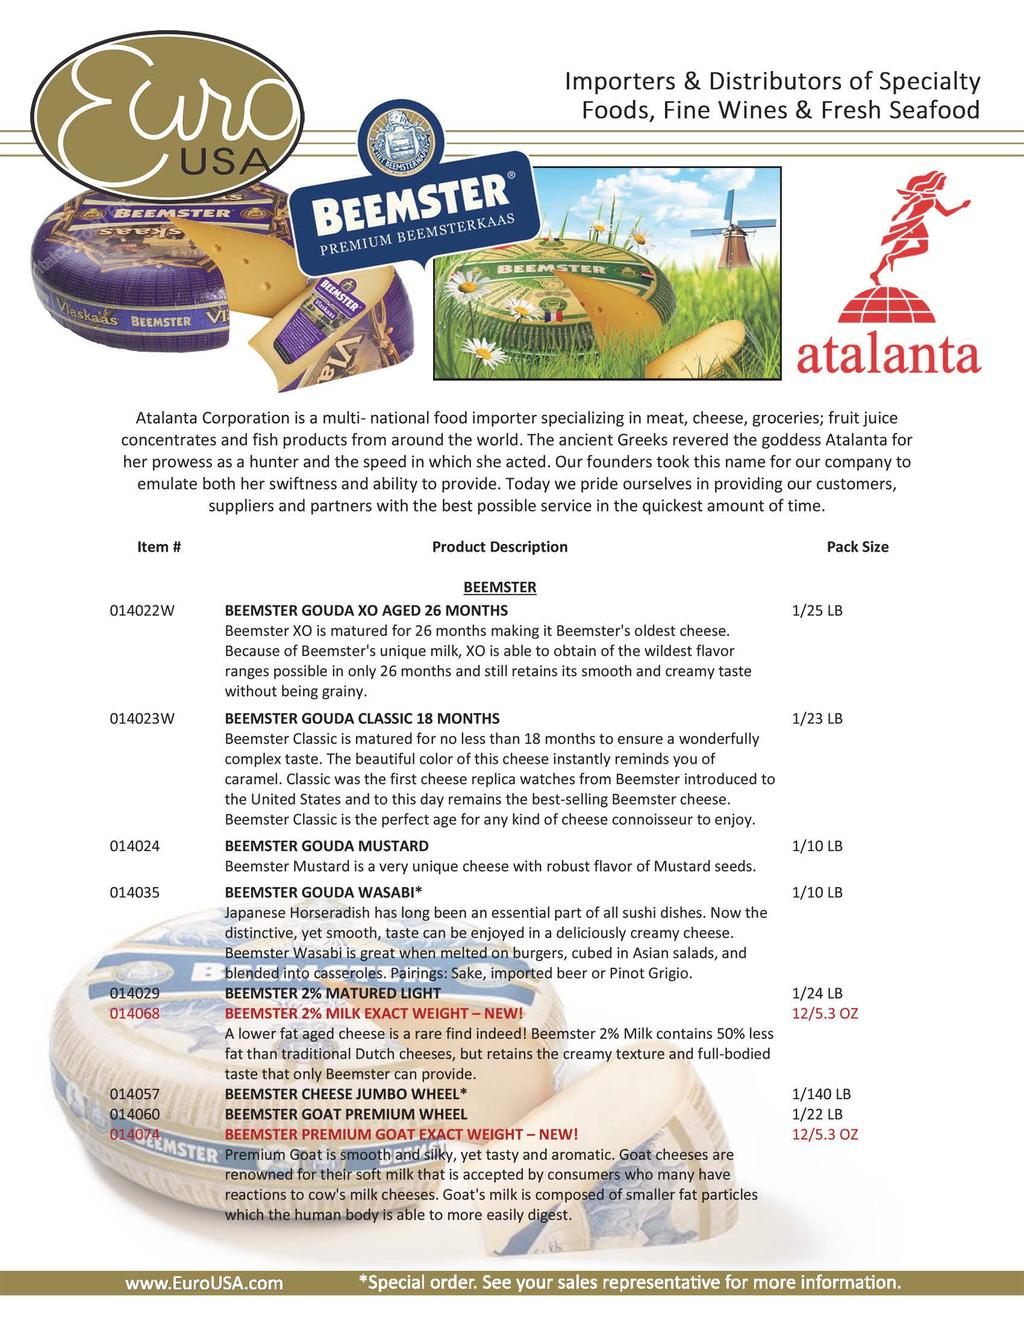 atalanta Atalanta Corporation is a multi- national food importer specializing in meat, cheese, groceries; fruit juice concentrates and fish products from around the world.